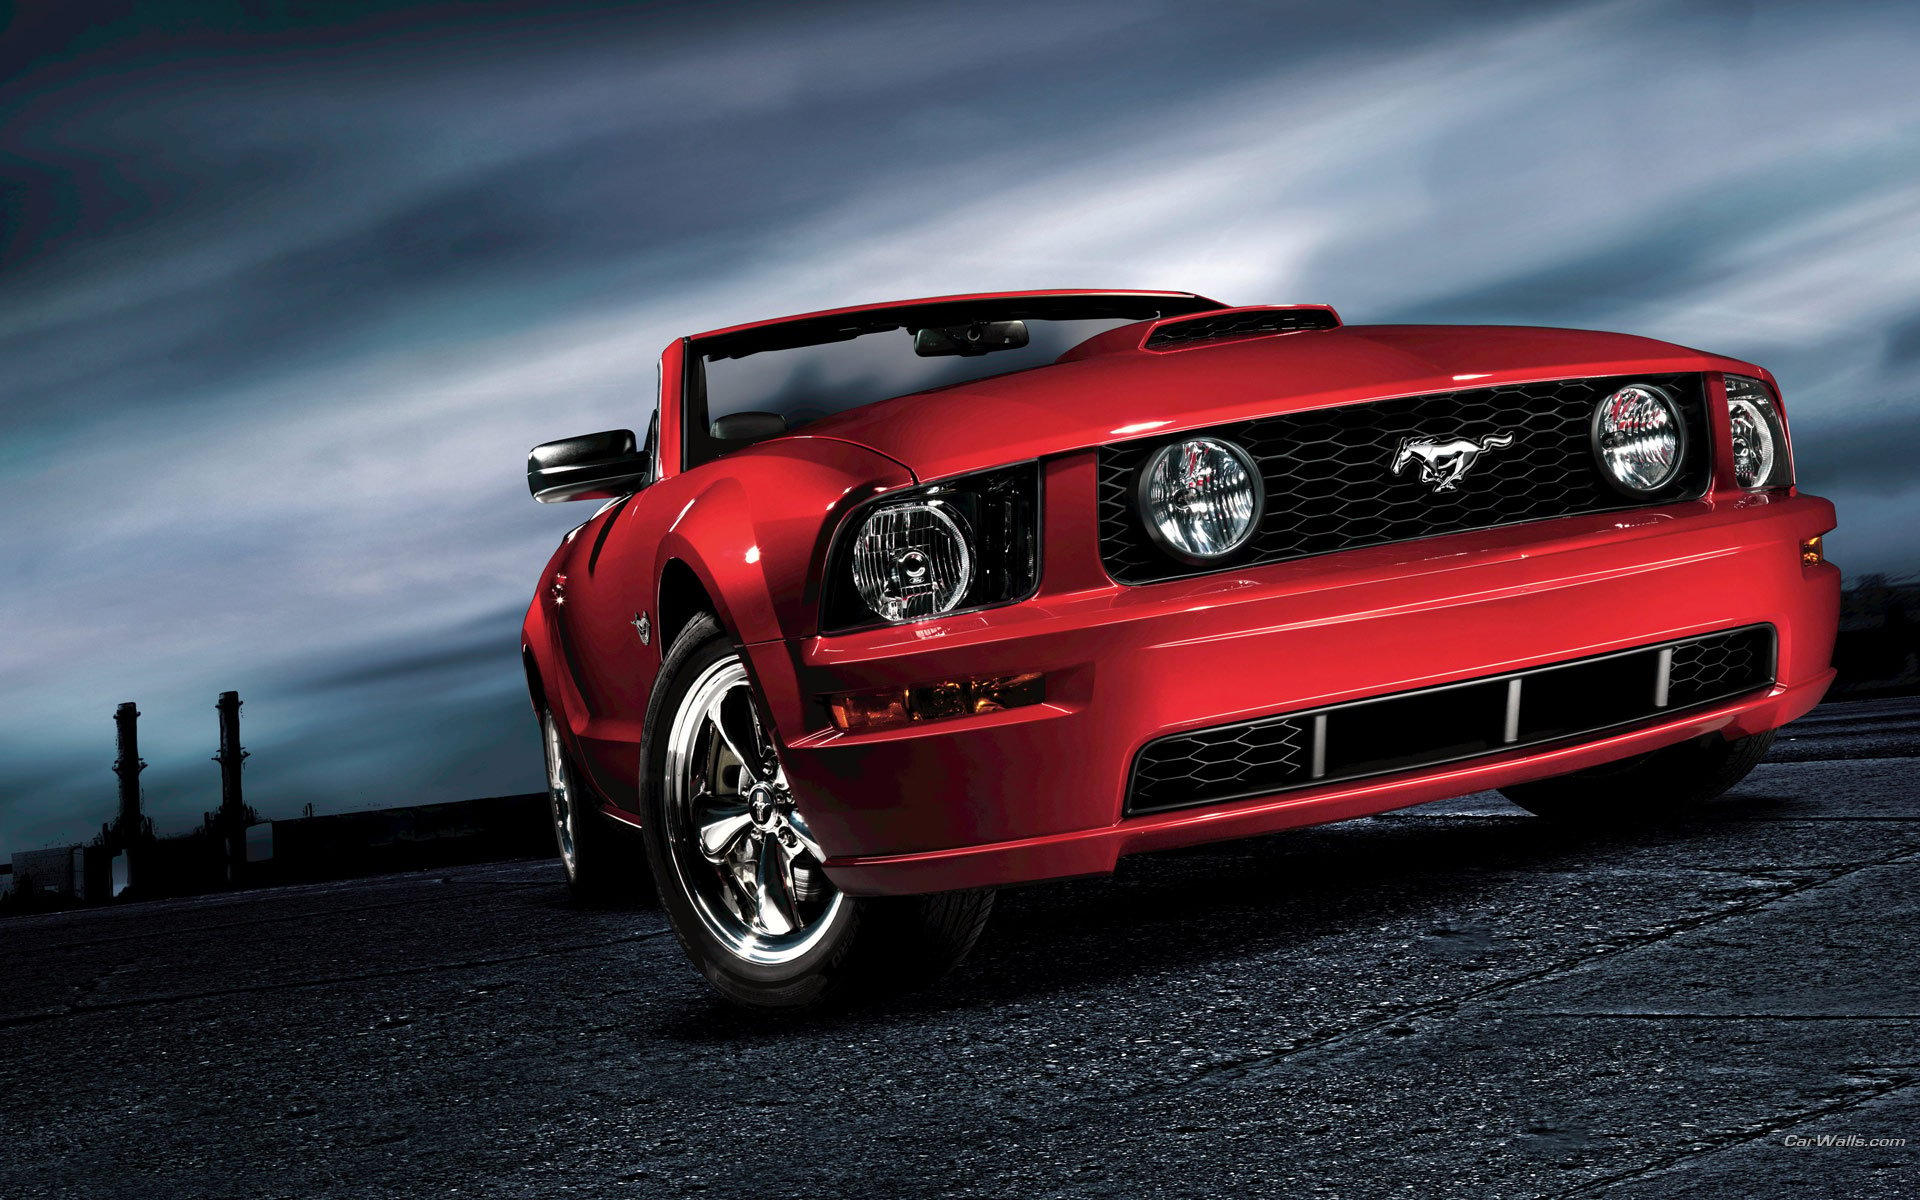 Free Download Ford Mustang Wallpapers Hd Wallpapers 1920x1200 For Your Desktop Mobile Tablet Explore 41 Free Ford Mustang Wallpaper Ford Gt Wallpaper Ford Mustang Gt Wallpaper Mustang Wallpaper